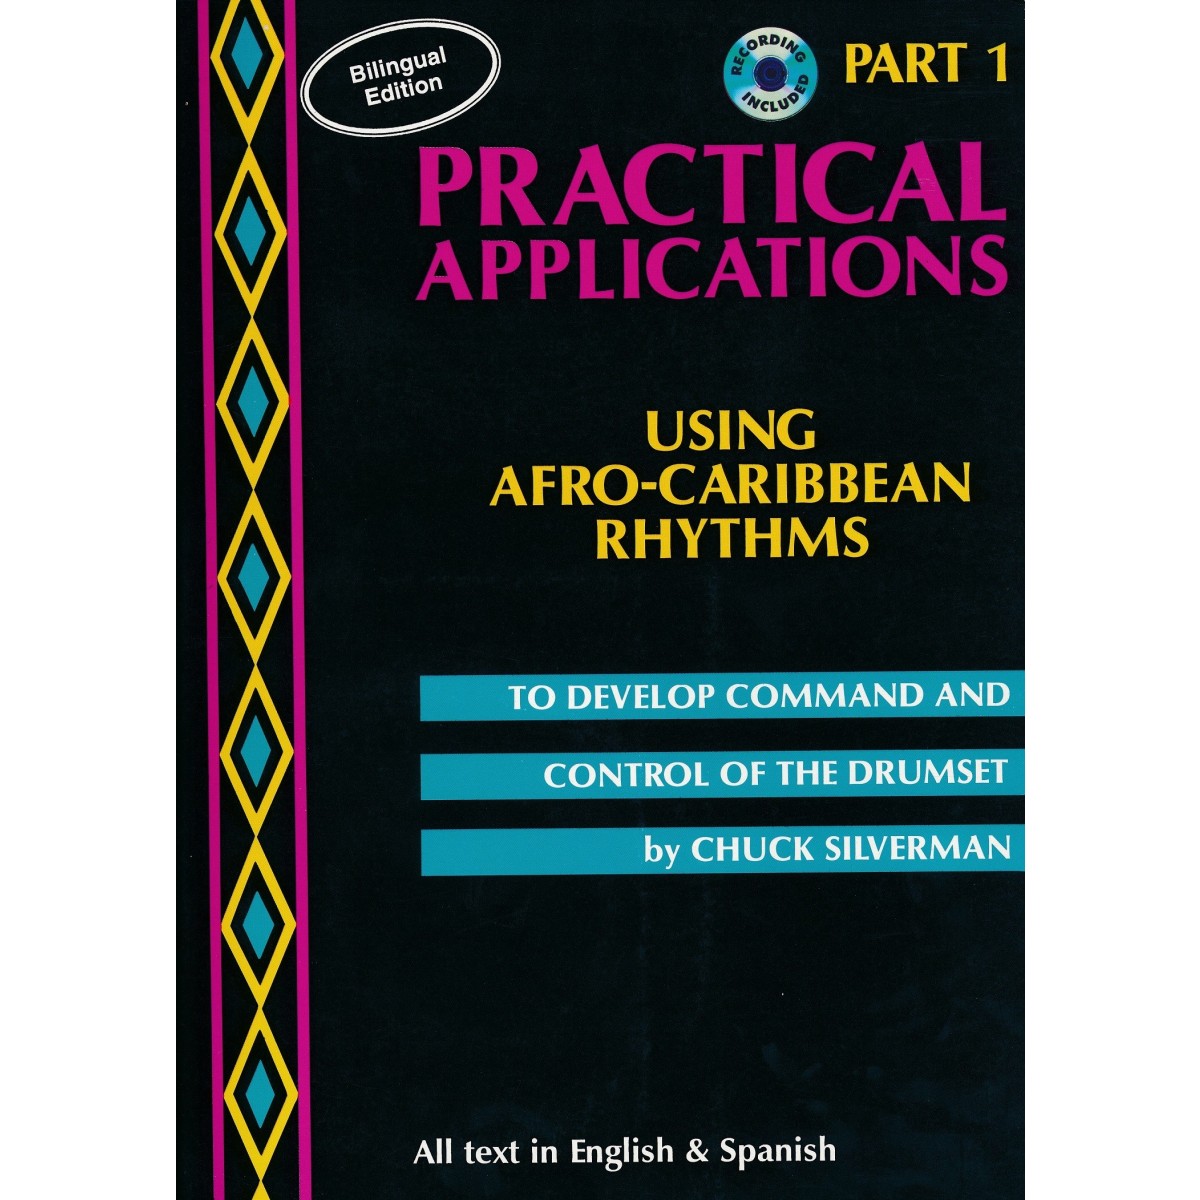 Practical Applications, Using Afro-caribbean Rhythms Part 1